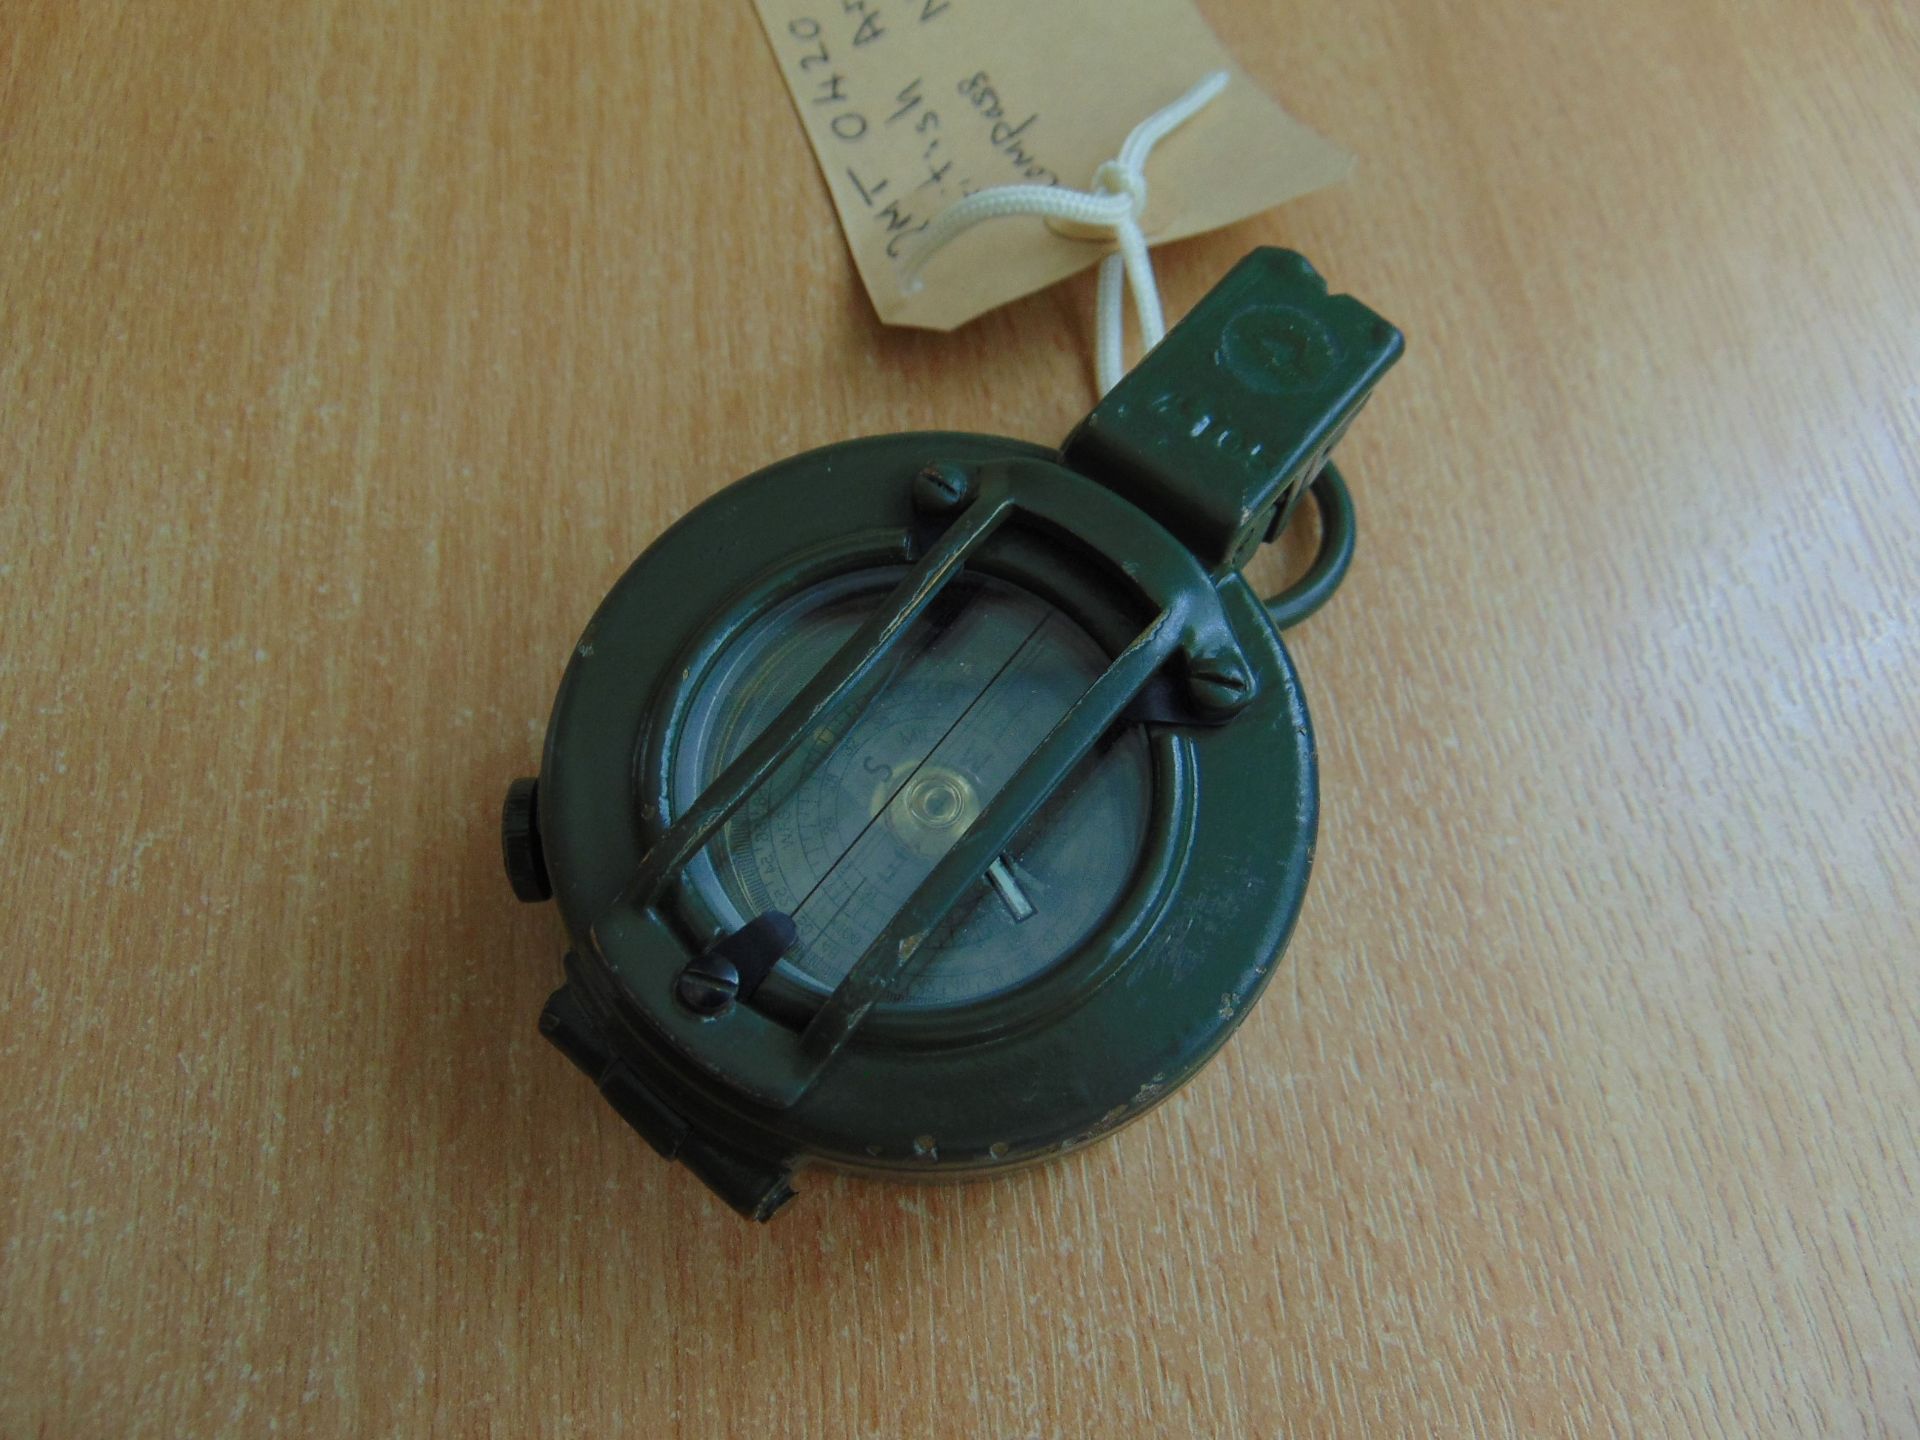 QMT 0420 British Army Prismatic Compass Nato Marks - Image 2 of 4